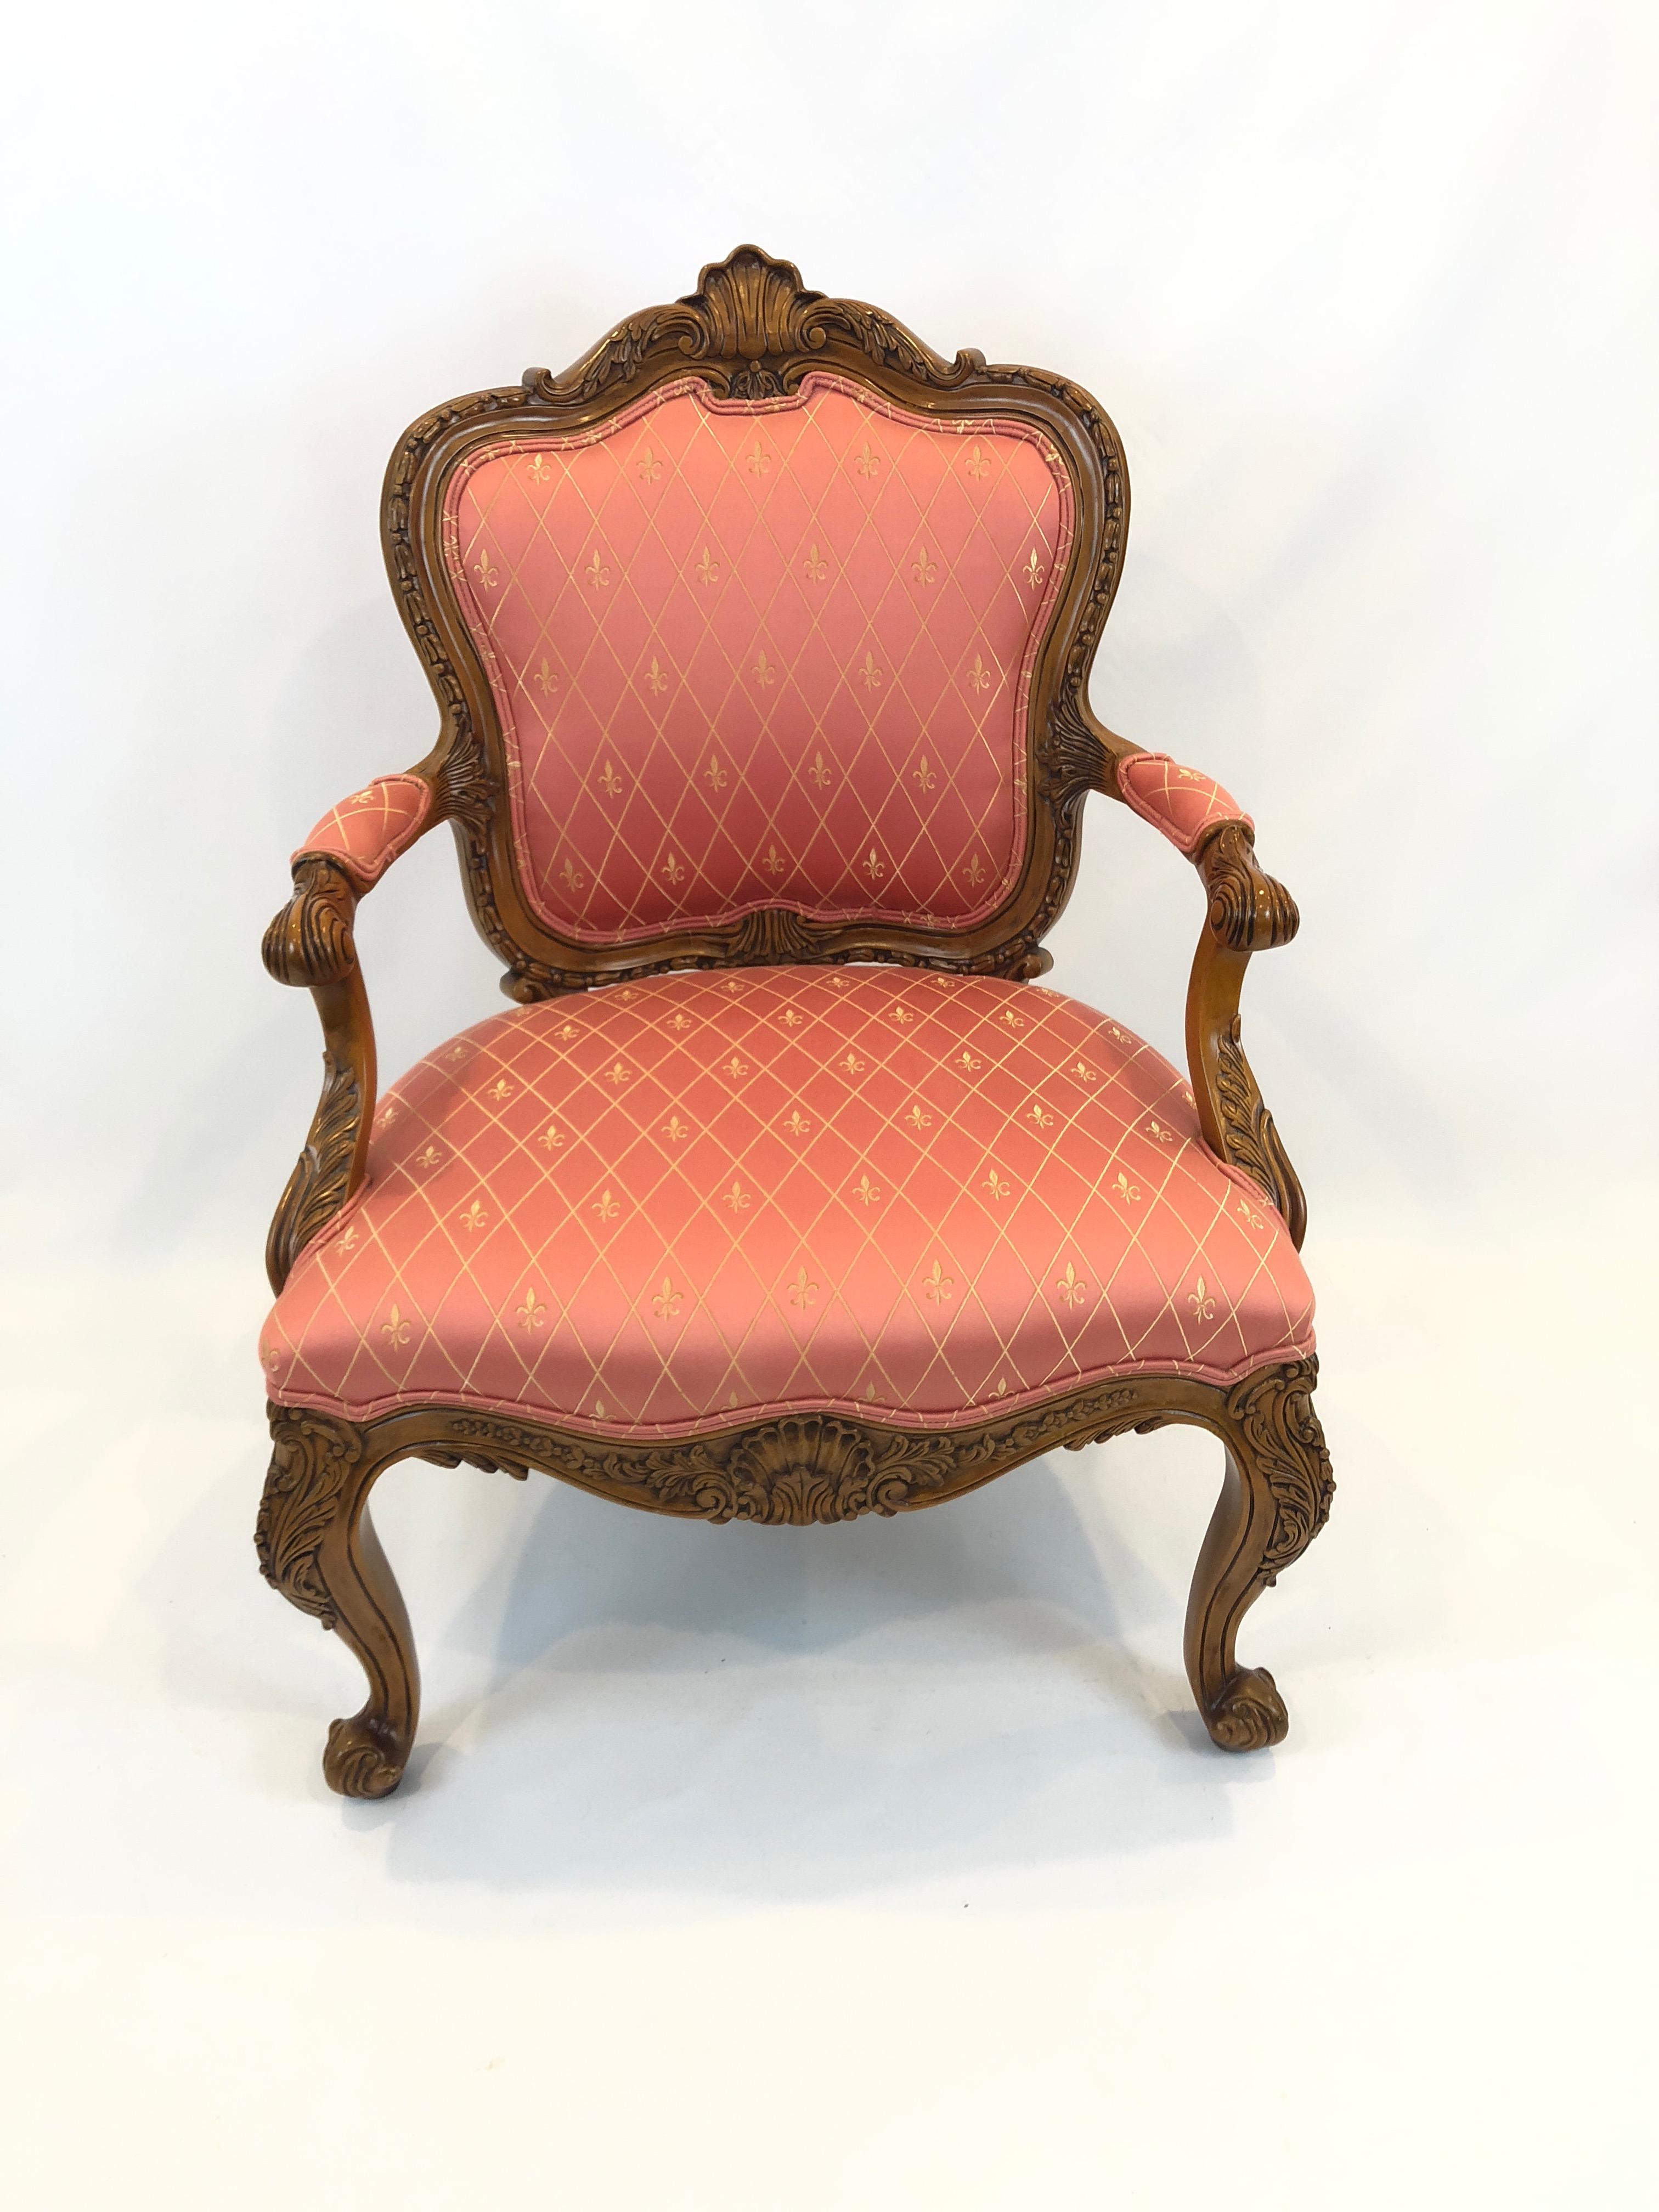 Very fancy ornately carved fruitwood armchair upholstered in rasberry fabric with fleur di lis pattern.
Arm height 25
seat depth 19.